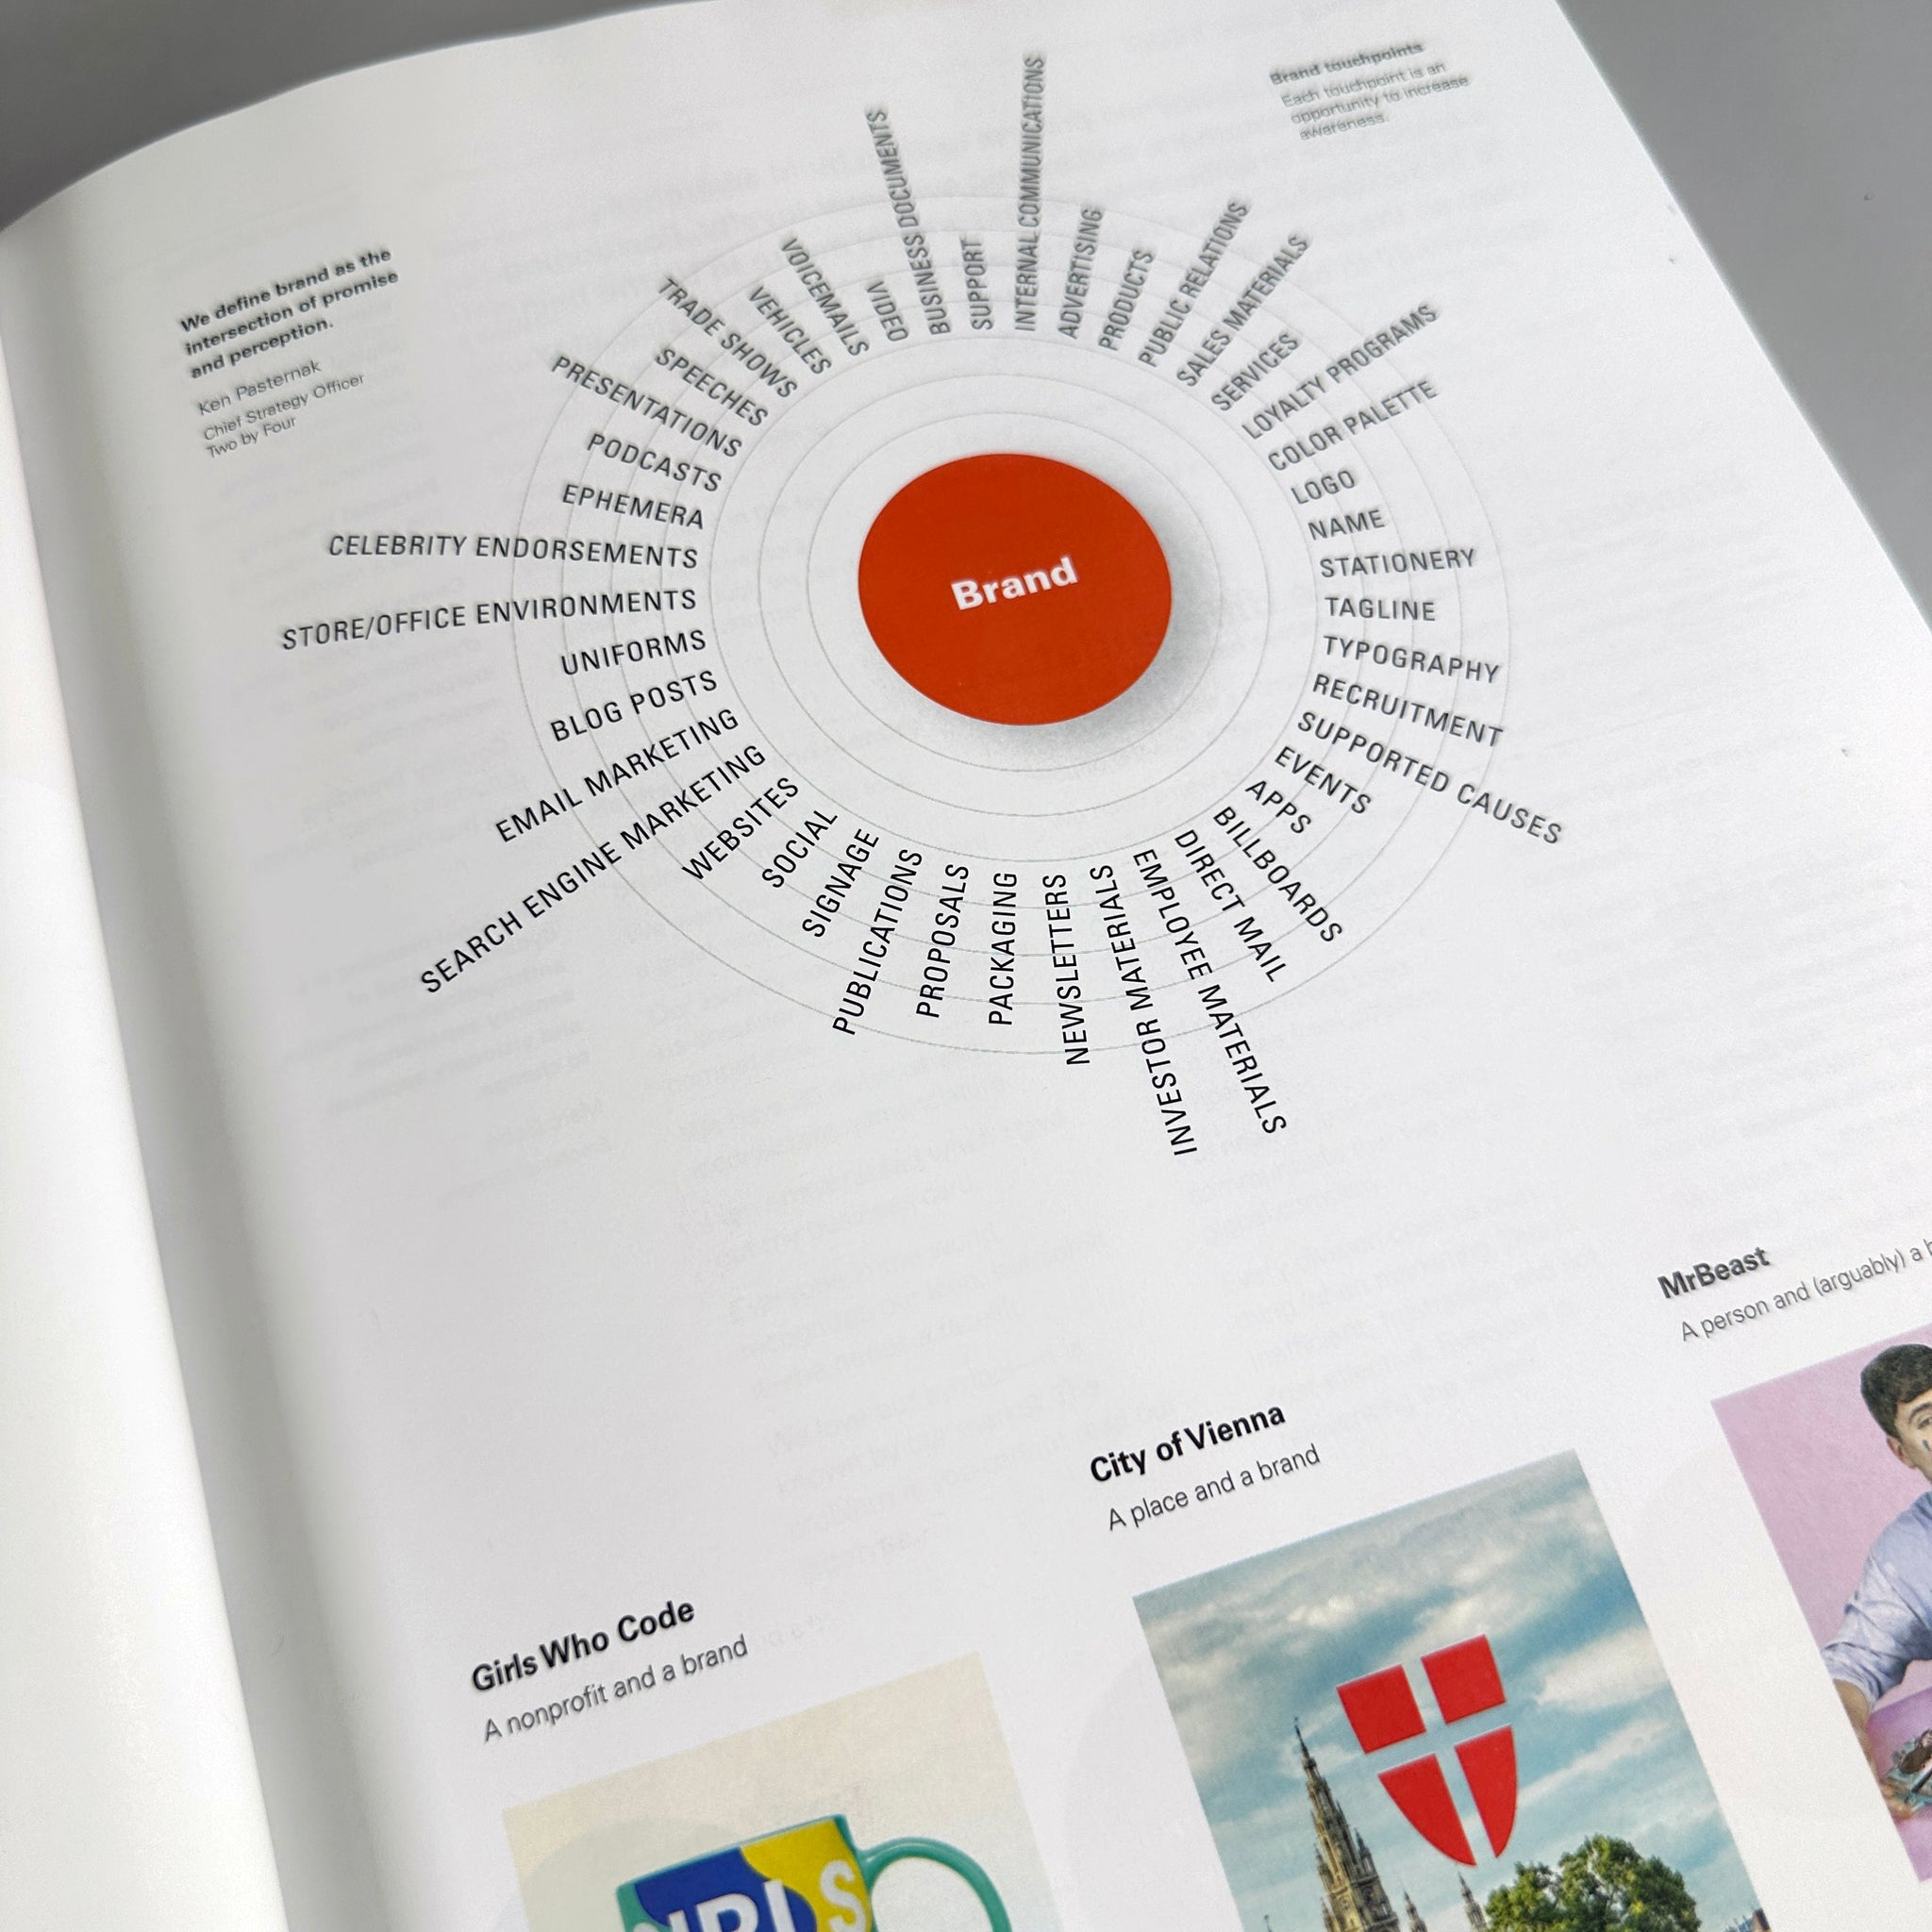 Designing Brand Identity: A Comprehensive Guide to the World of Brands and Branding (Sixth Edition)